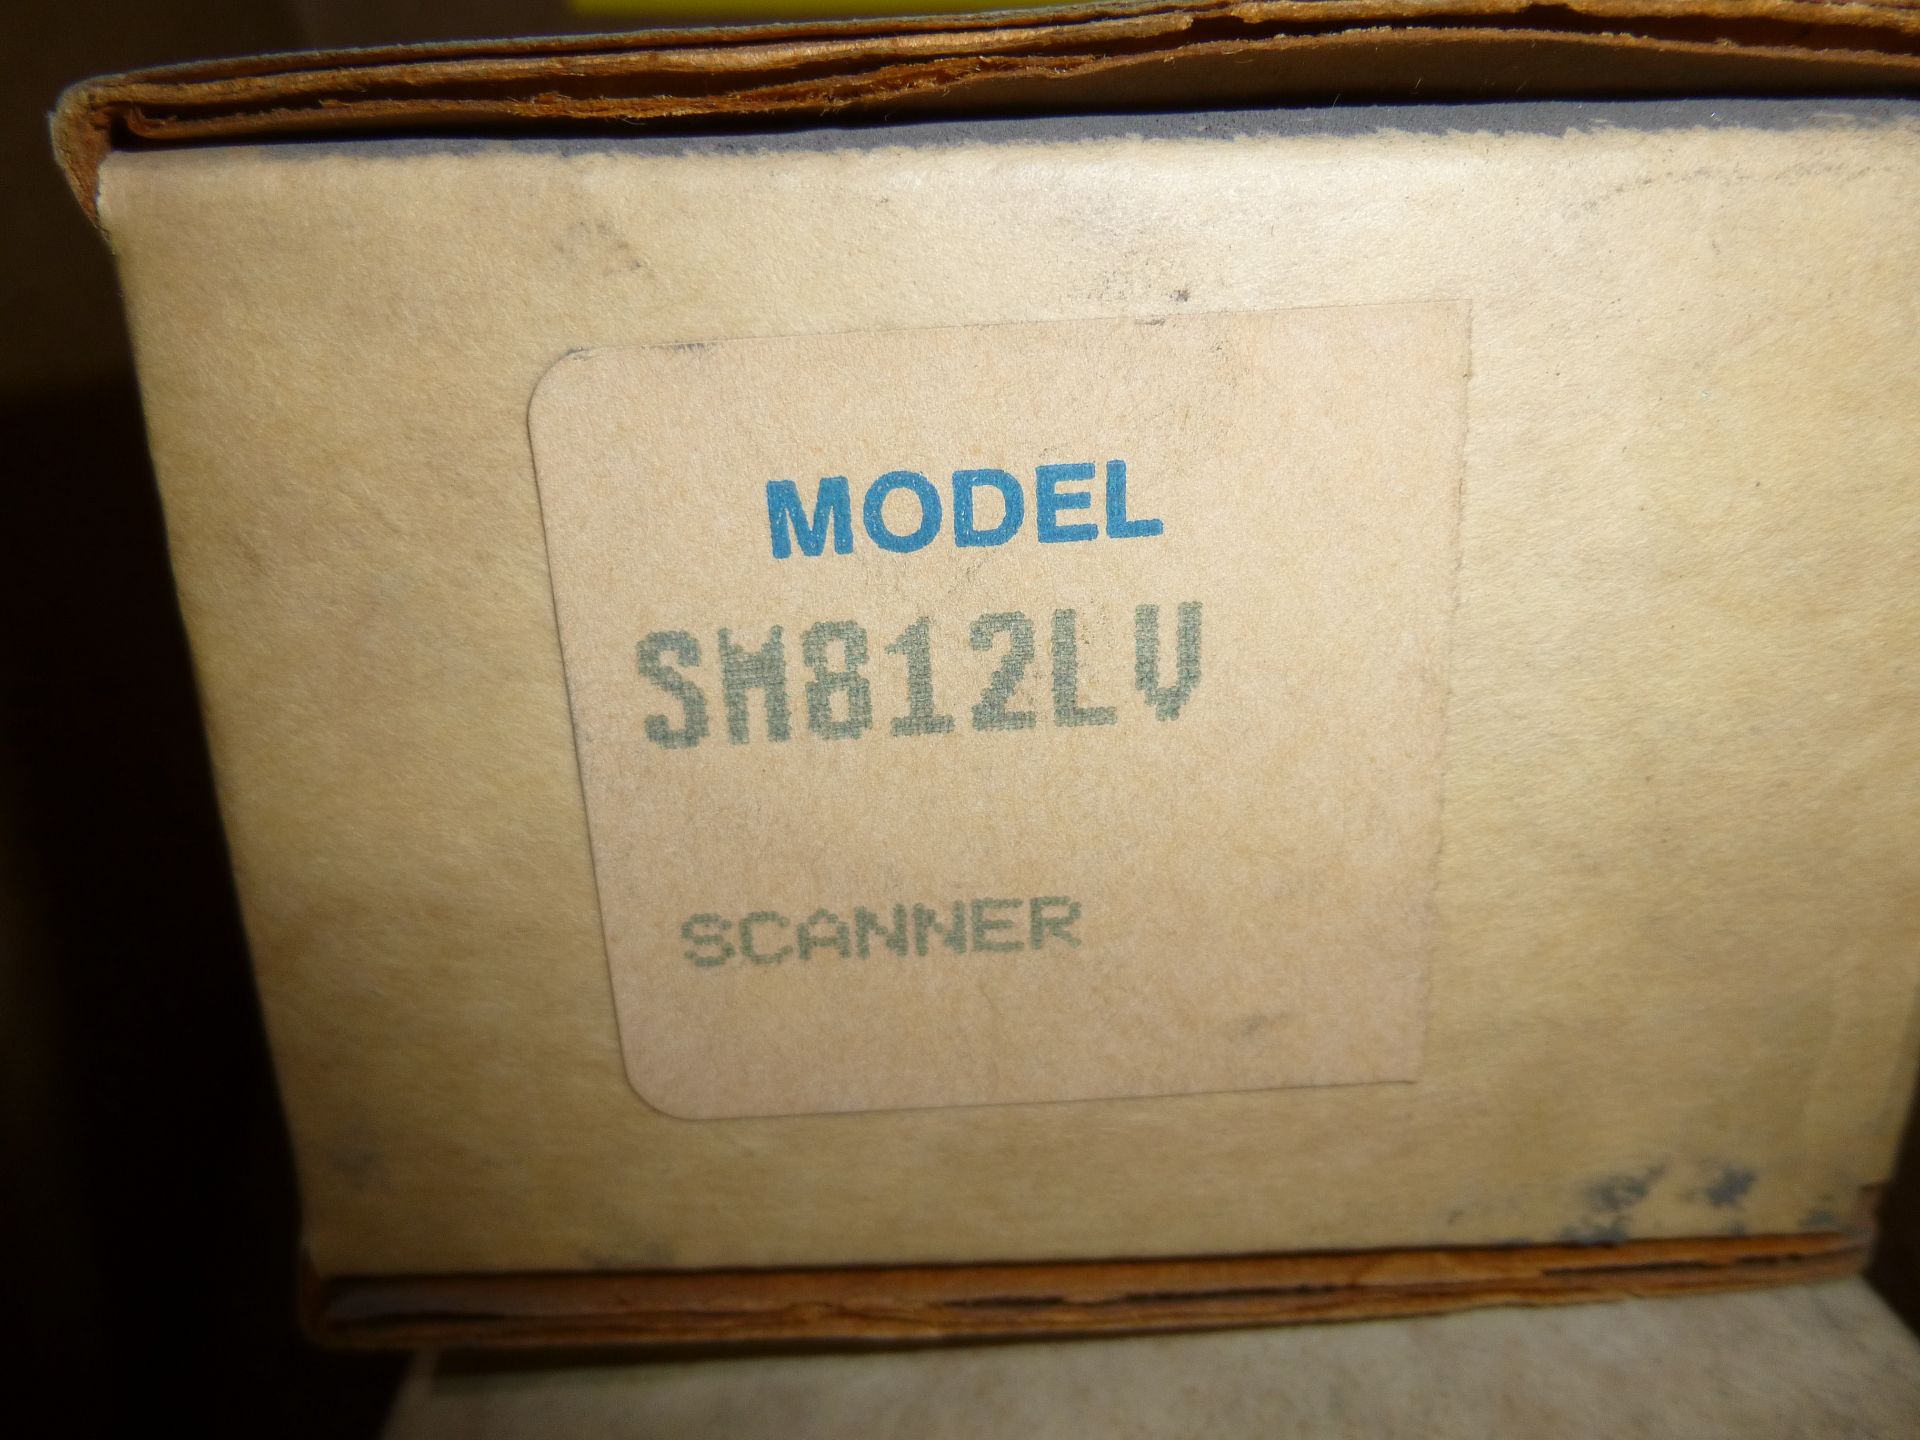 Qty 2 Model SM812LV, new in boxes, as always with Brolyn LLC auctions, all lots can be picked up - Image 2 of 2